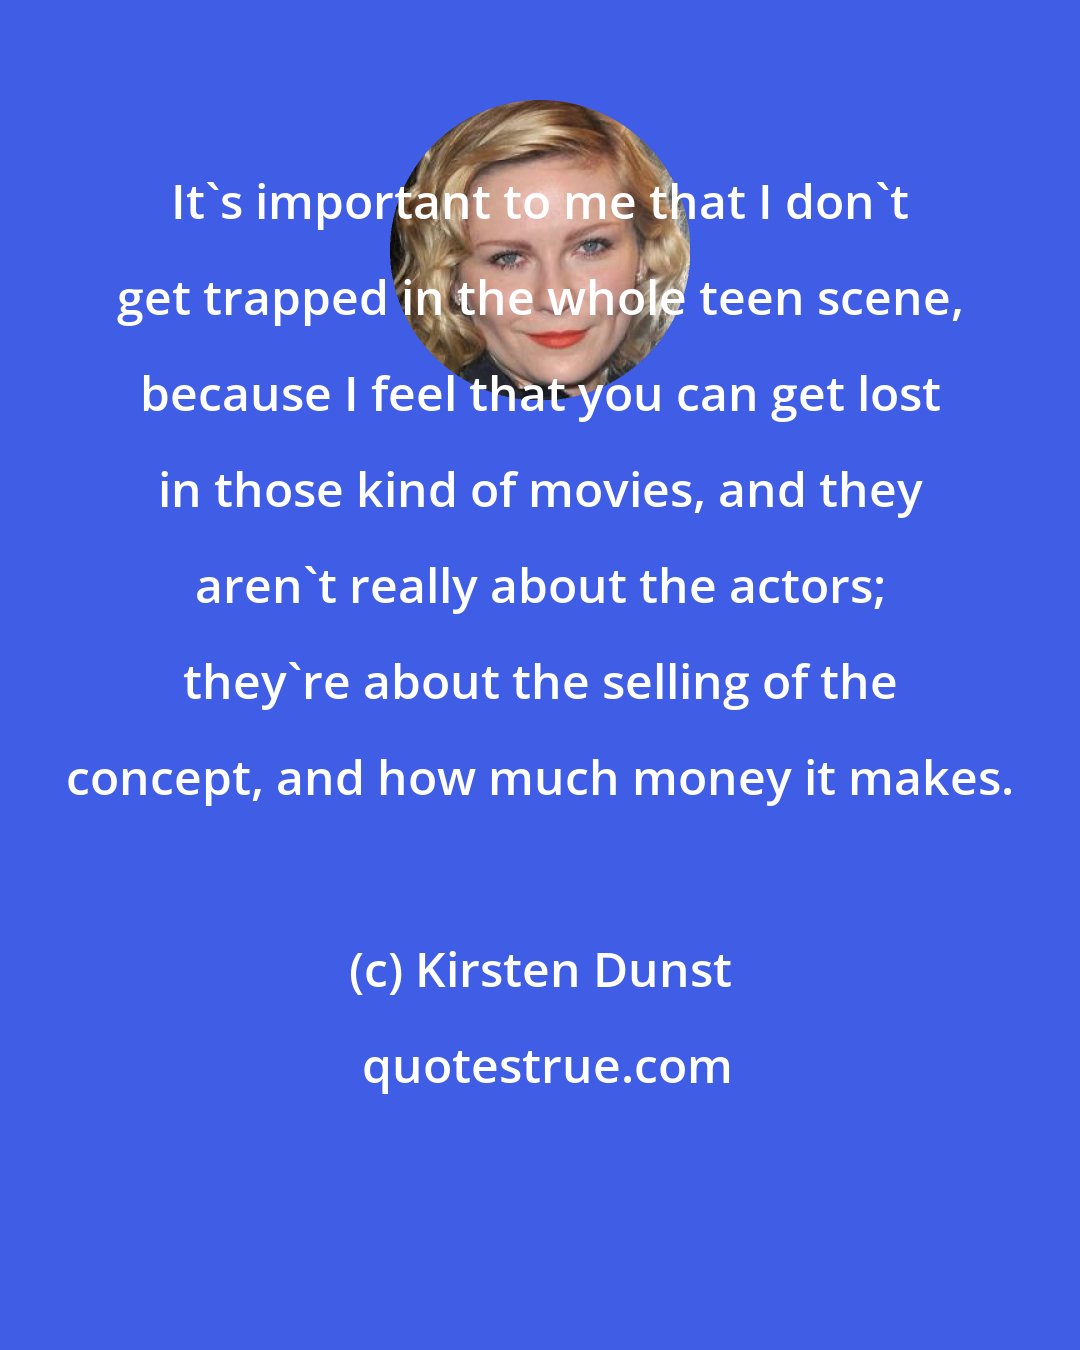 Kirsten Dunst: It's important to me that I don't get trapped in the whole teen scene, because I feel that you can get lost in those kind of movies, and they aren't really about the actors; they're about the selling of the concept, and how much money it makes.